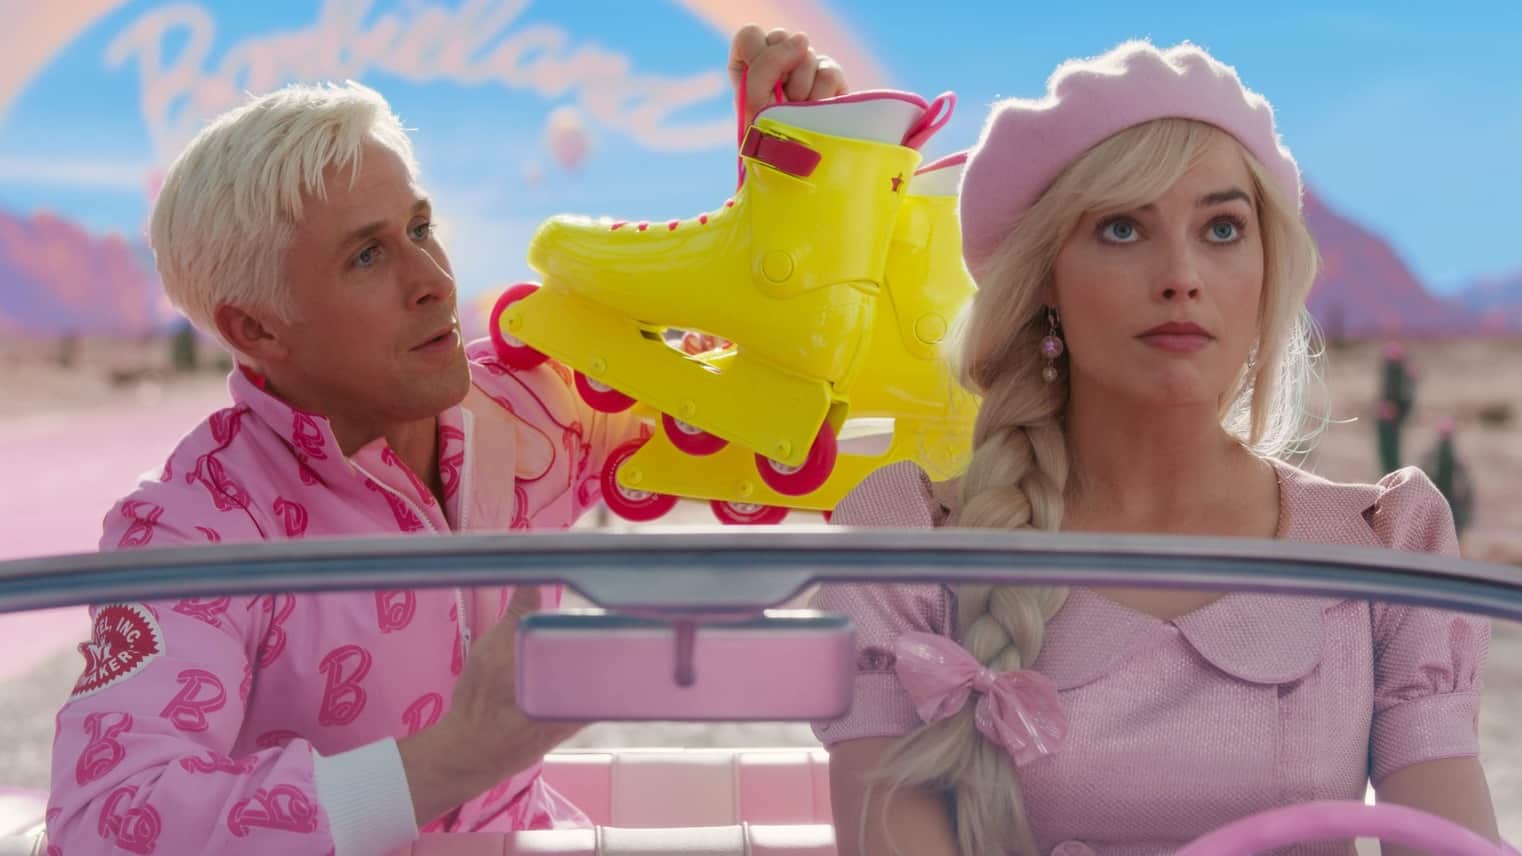 A man holds up yellow rollerblades to a woman driving a car in this image from Sony Pictures.